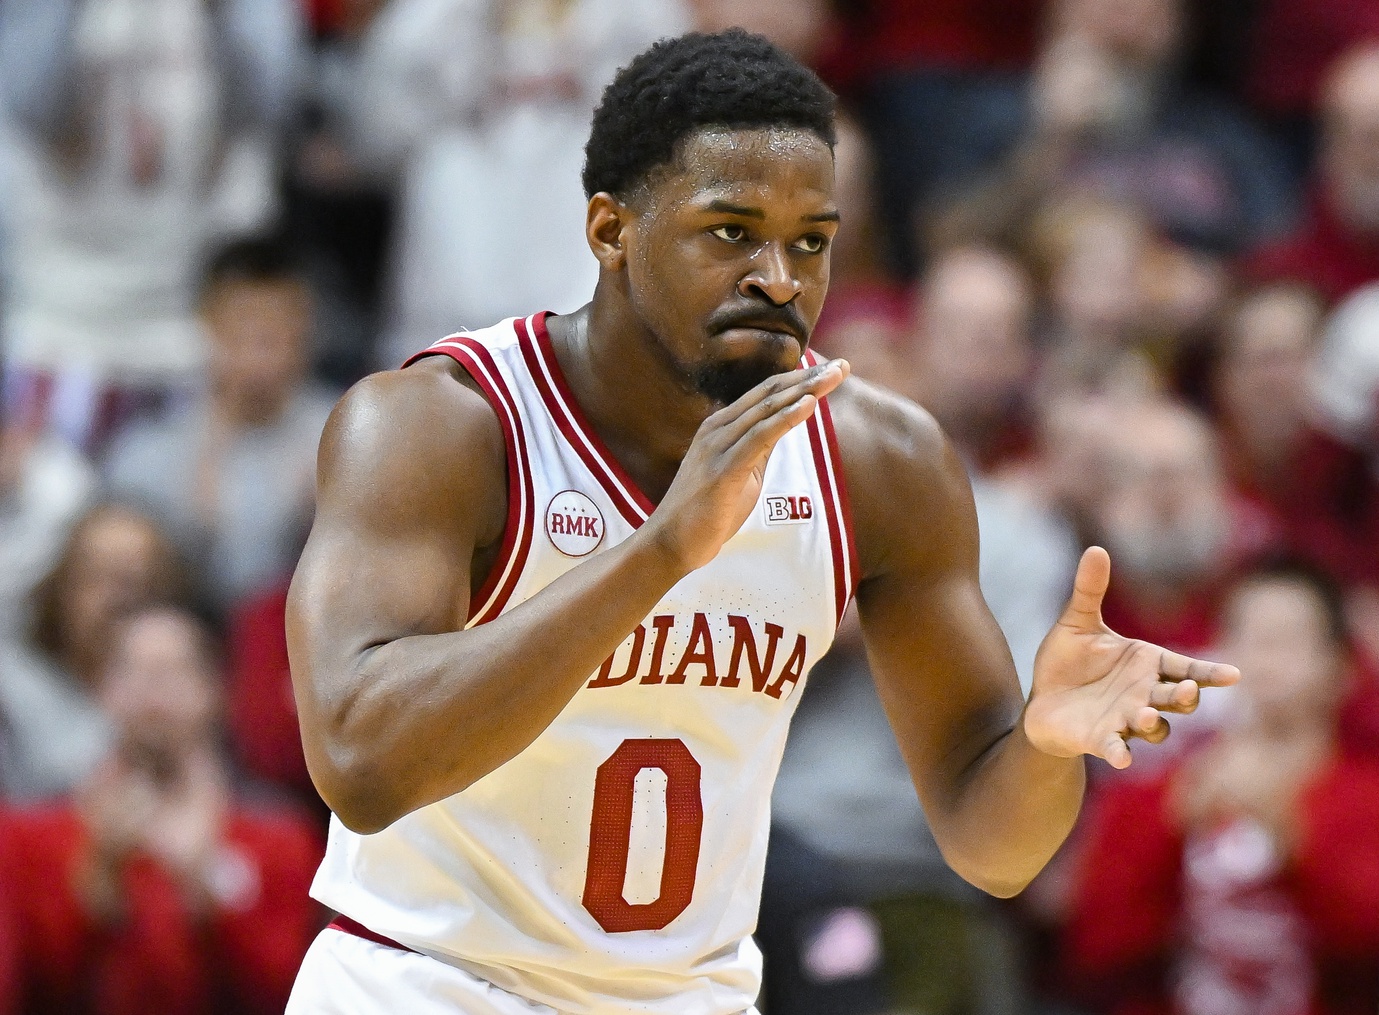 Indiana Hoosiers guard Xavier Johnson (0) claps his hands after a play against the Ohio State Buckeyes.  